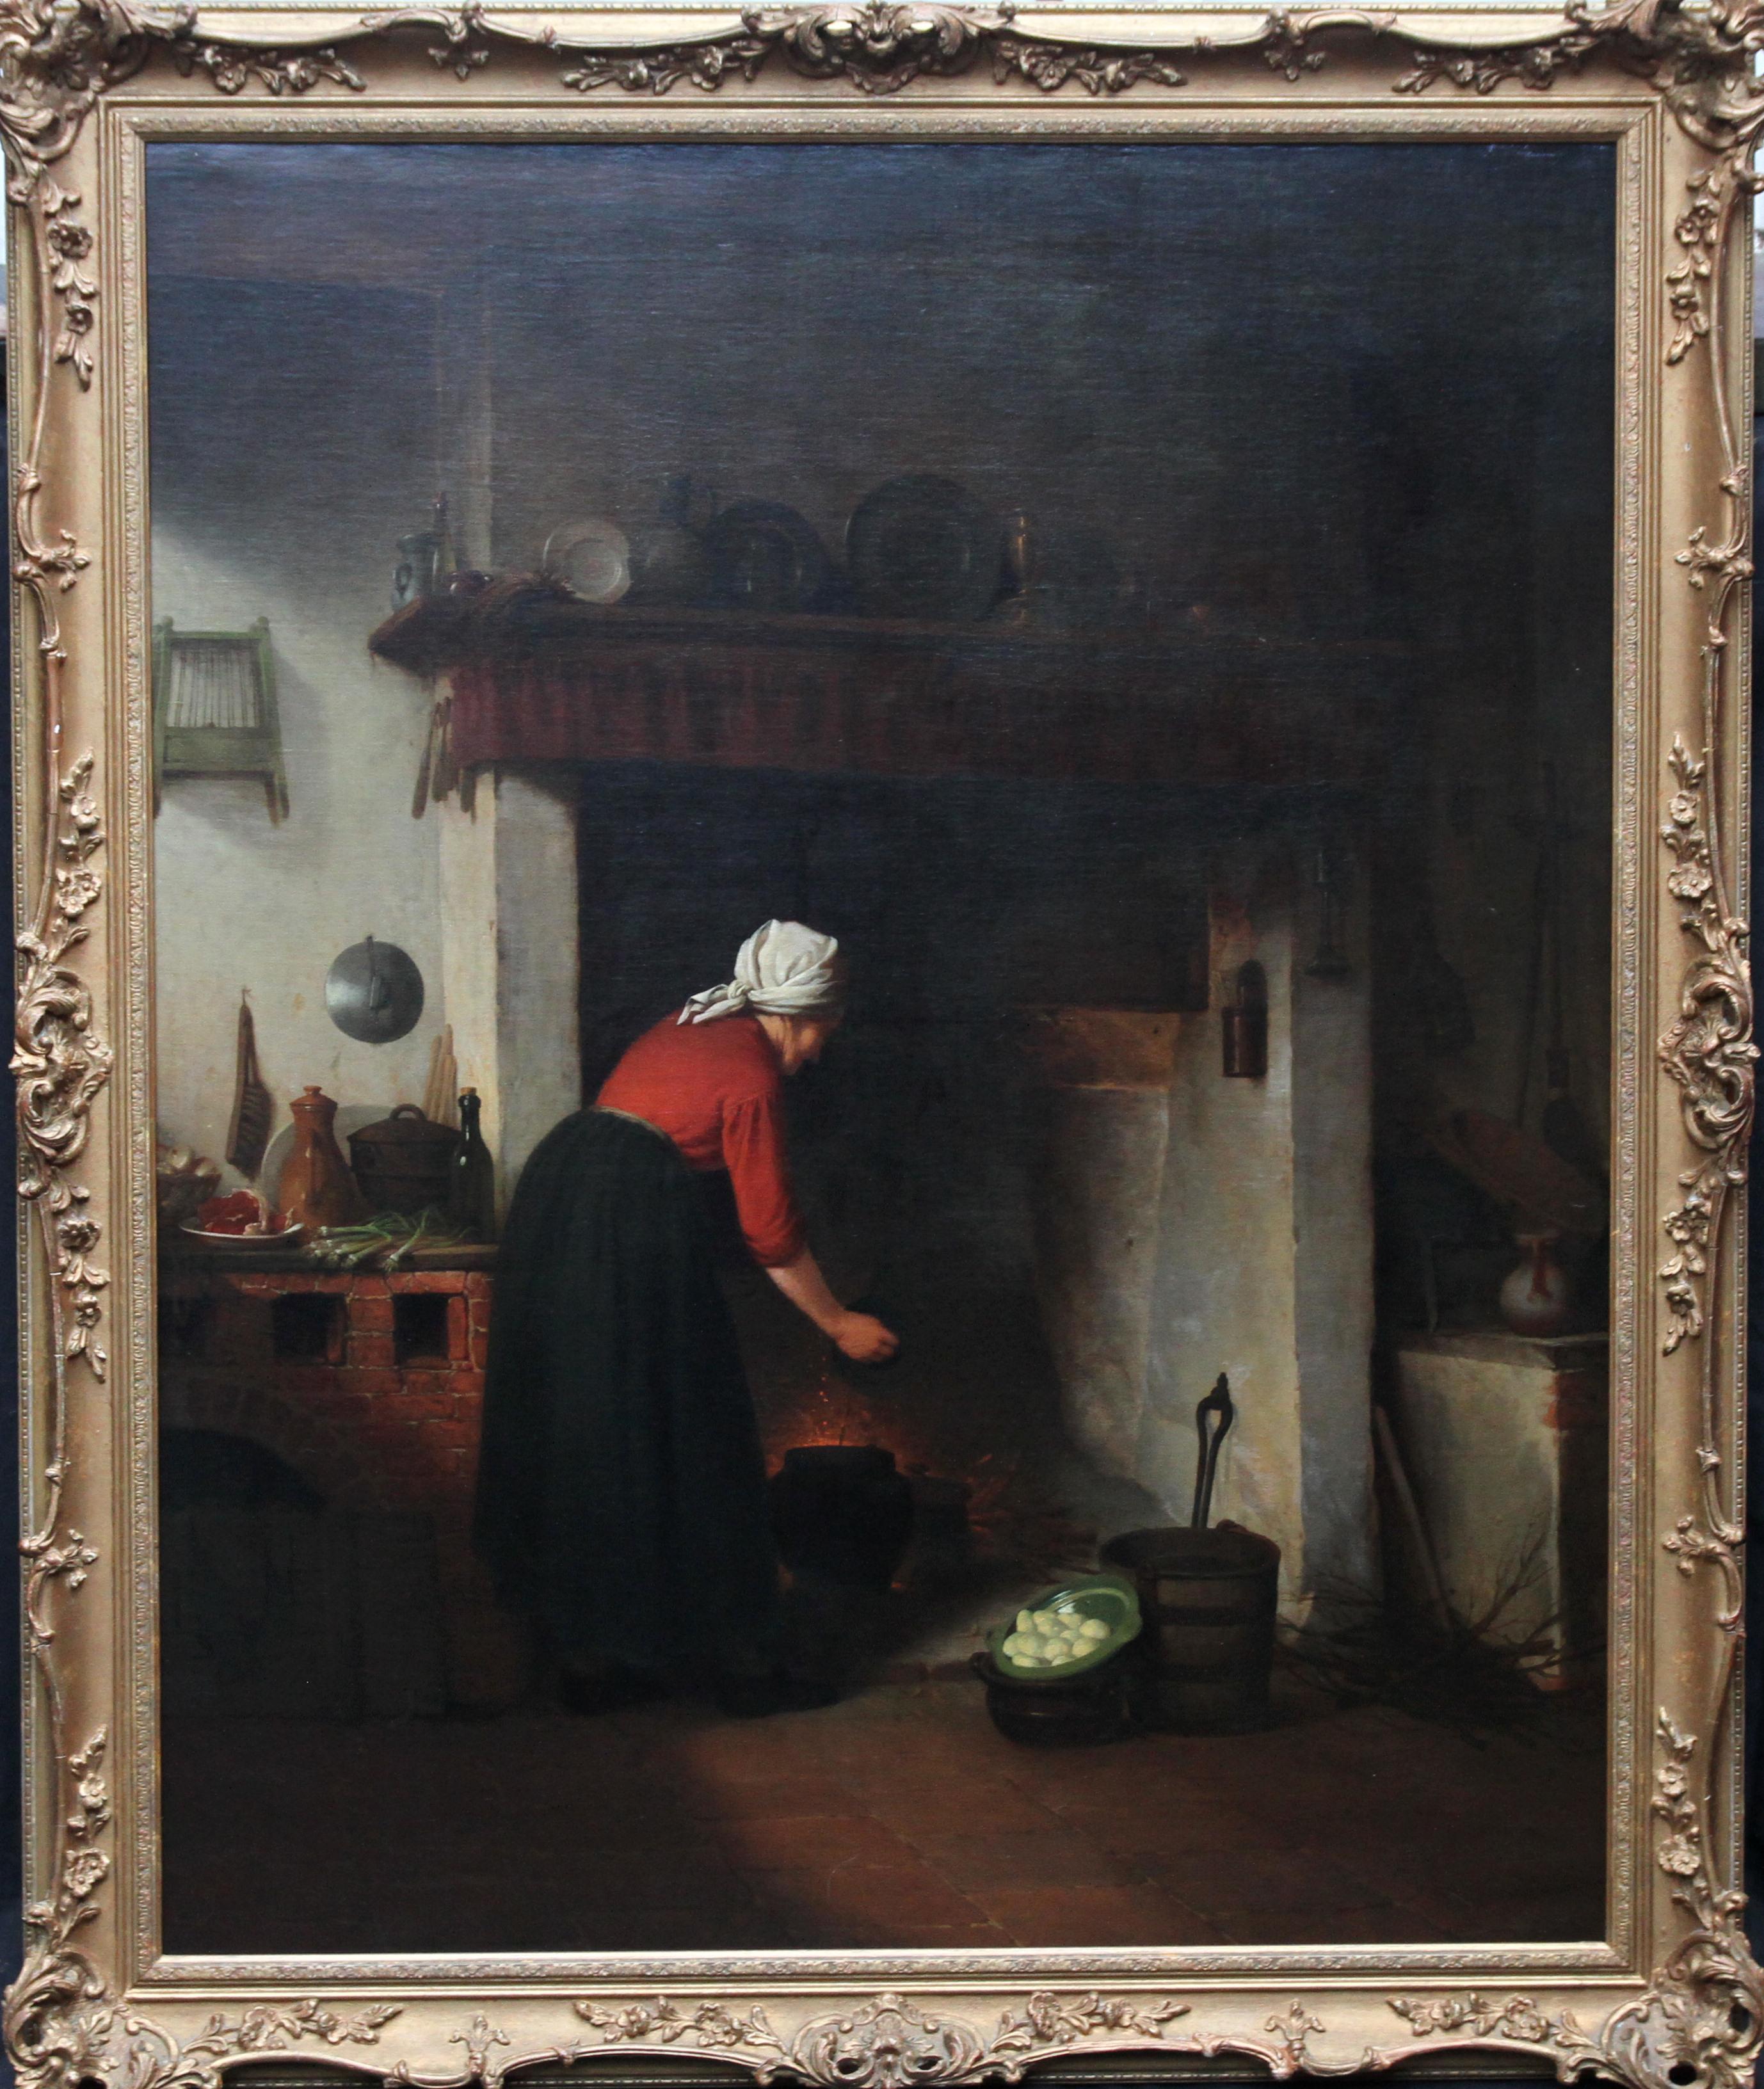 Unknown Figurative Painting - Woman Cooking in a Cottage Interior - Dutch Victorian genre art oil painting